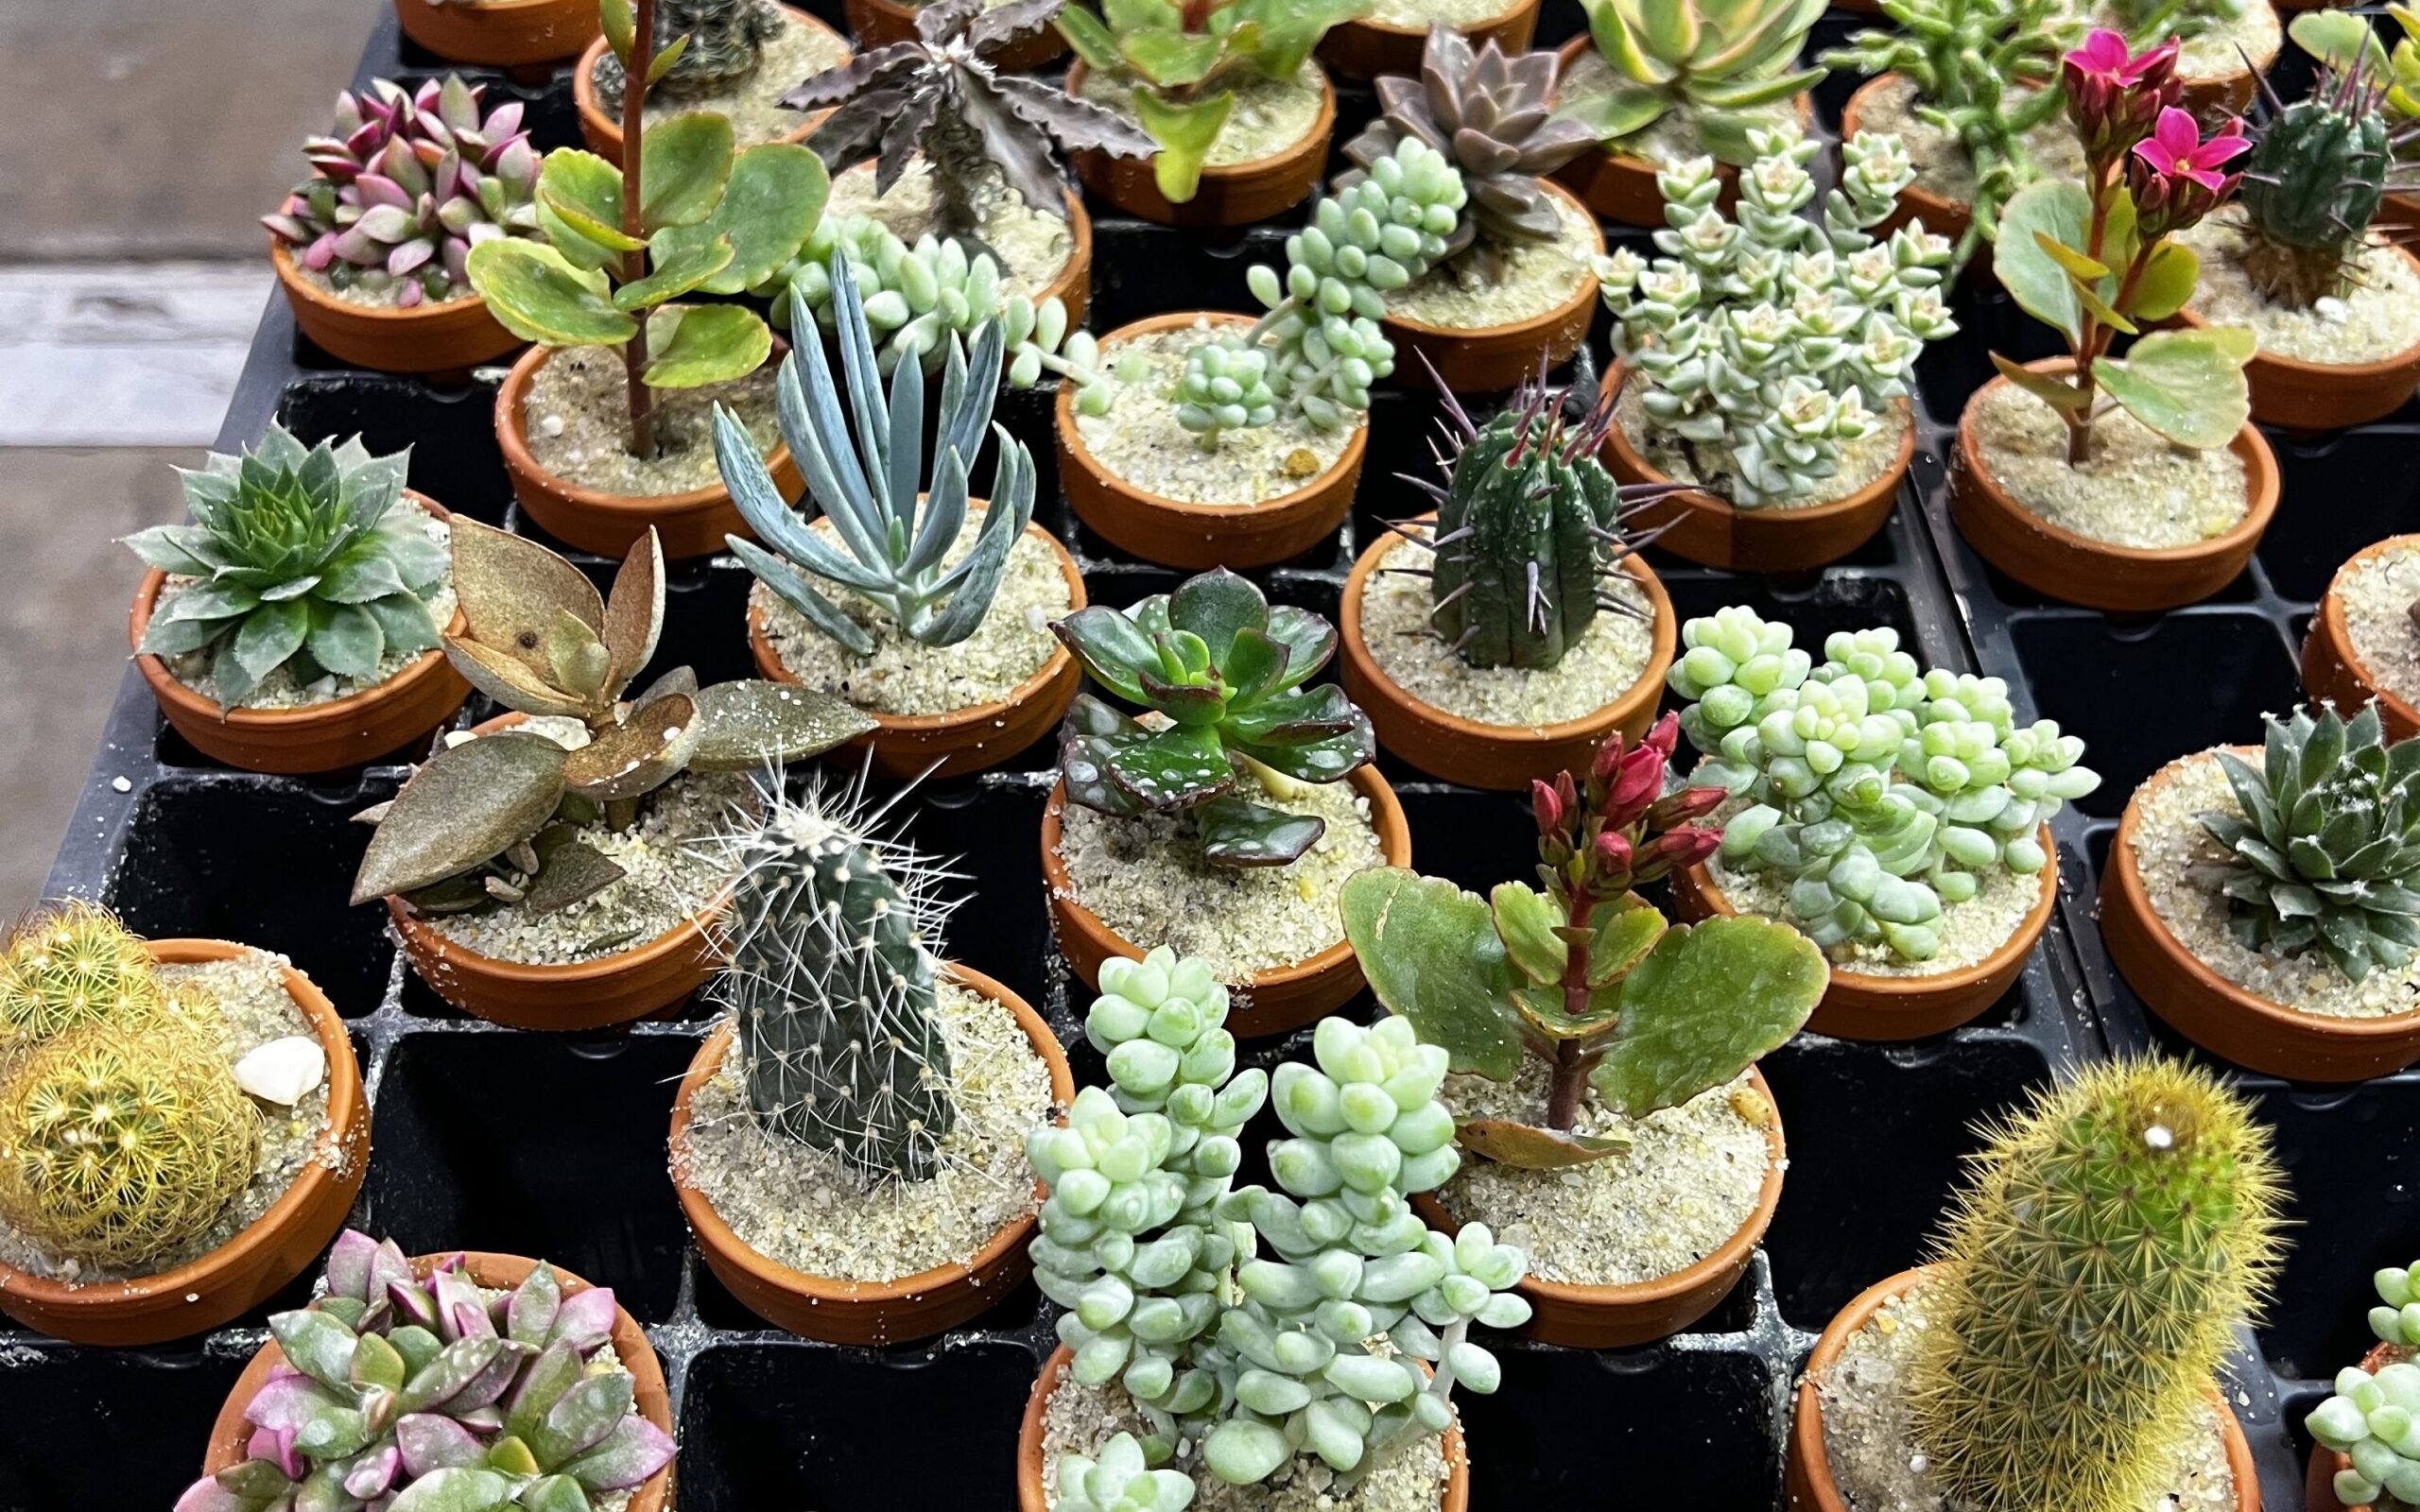 Cactus and Succulents for sale at the Philadelphia Flower Show. Image: Cara Stapleton for Solo Real Estate